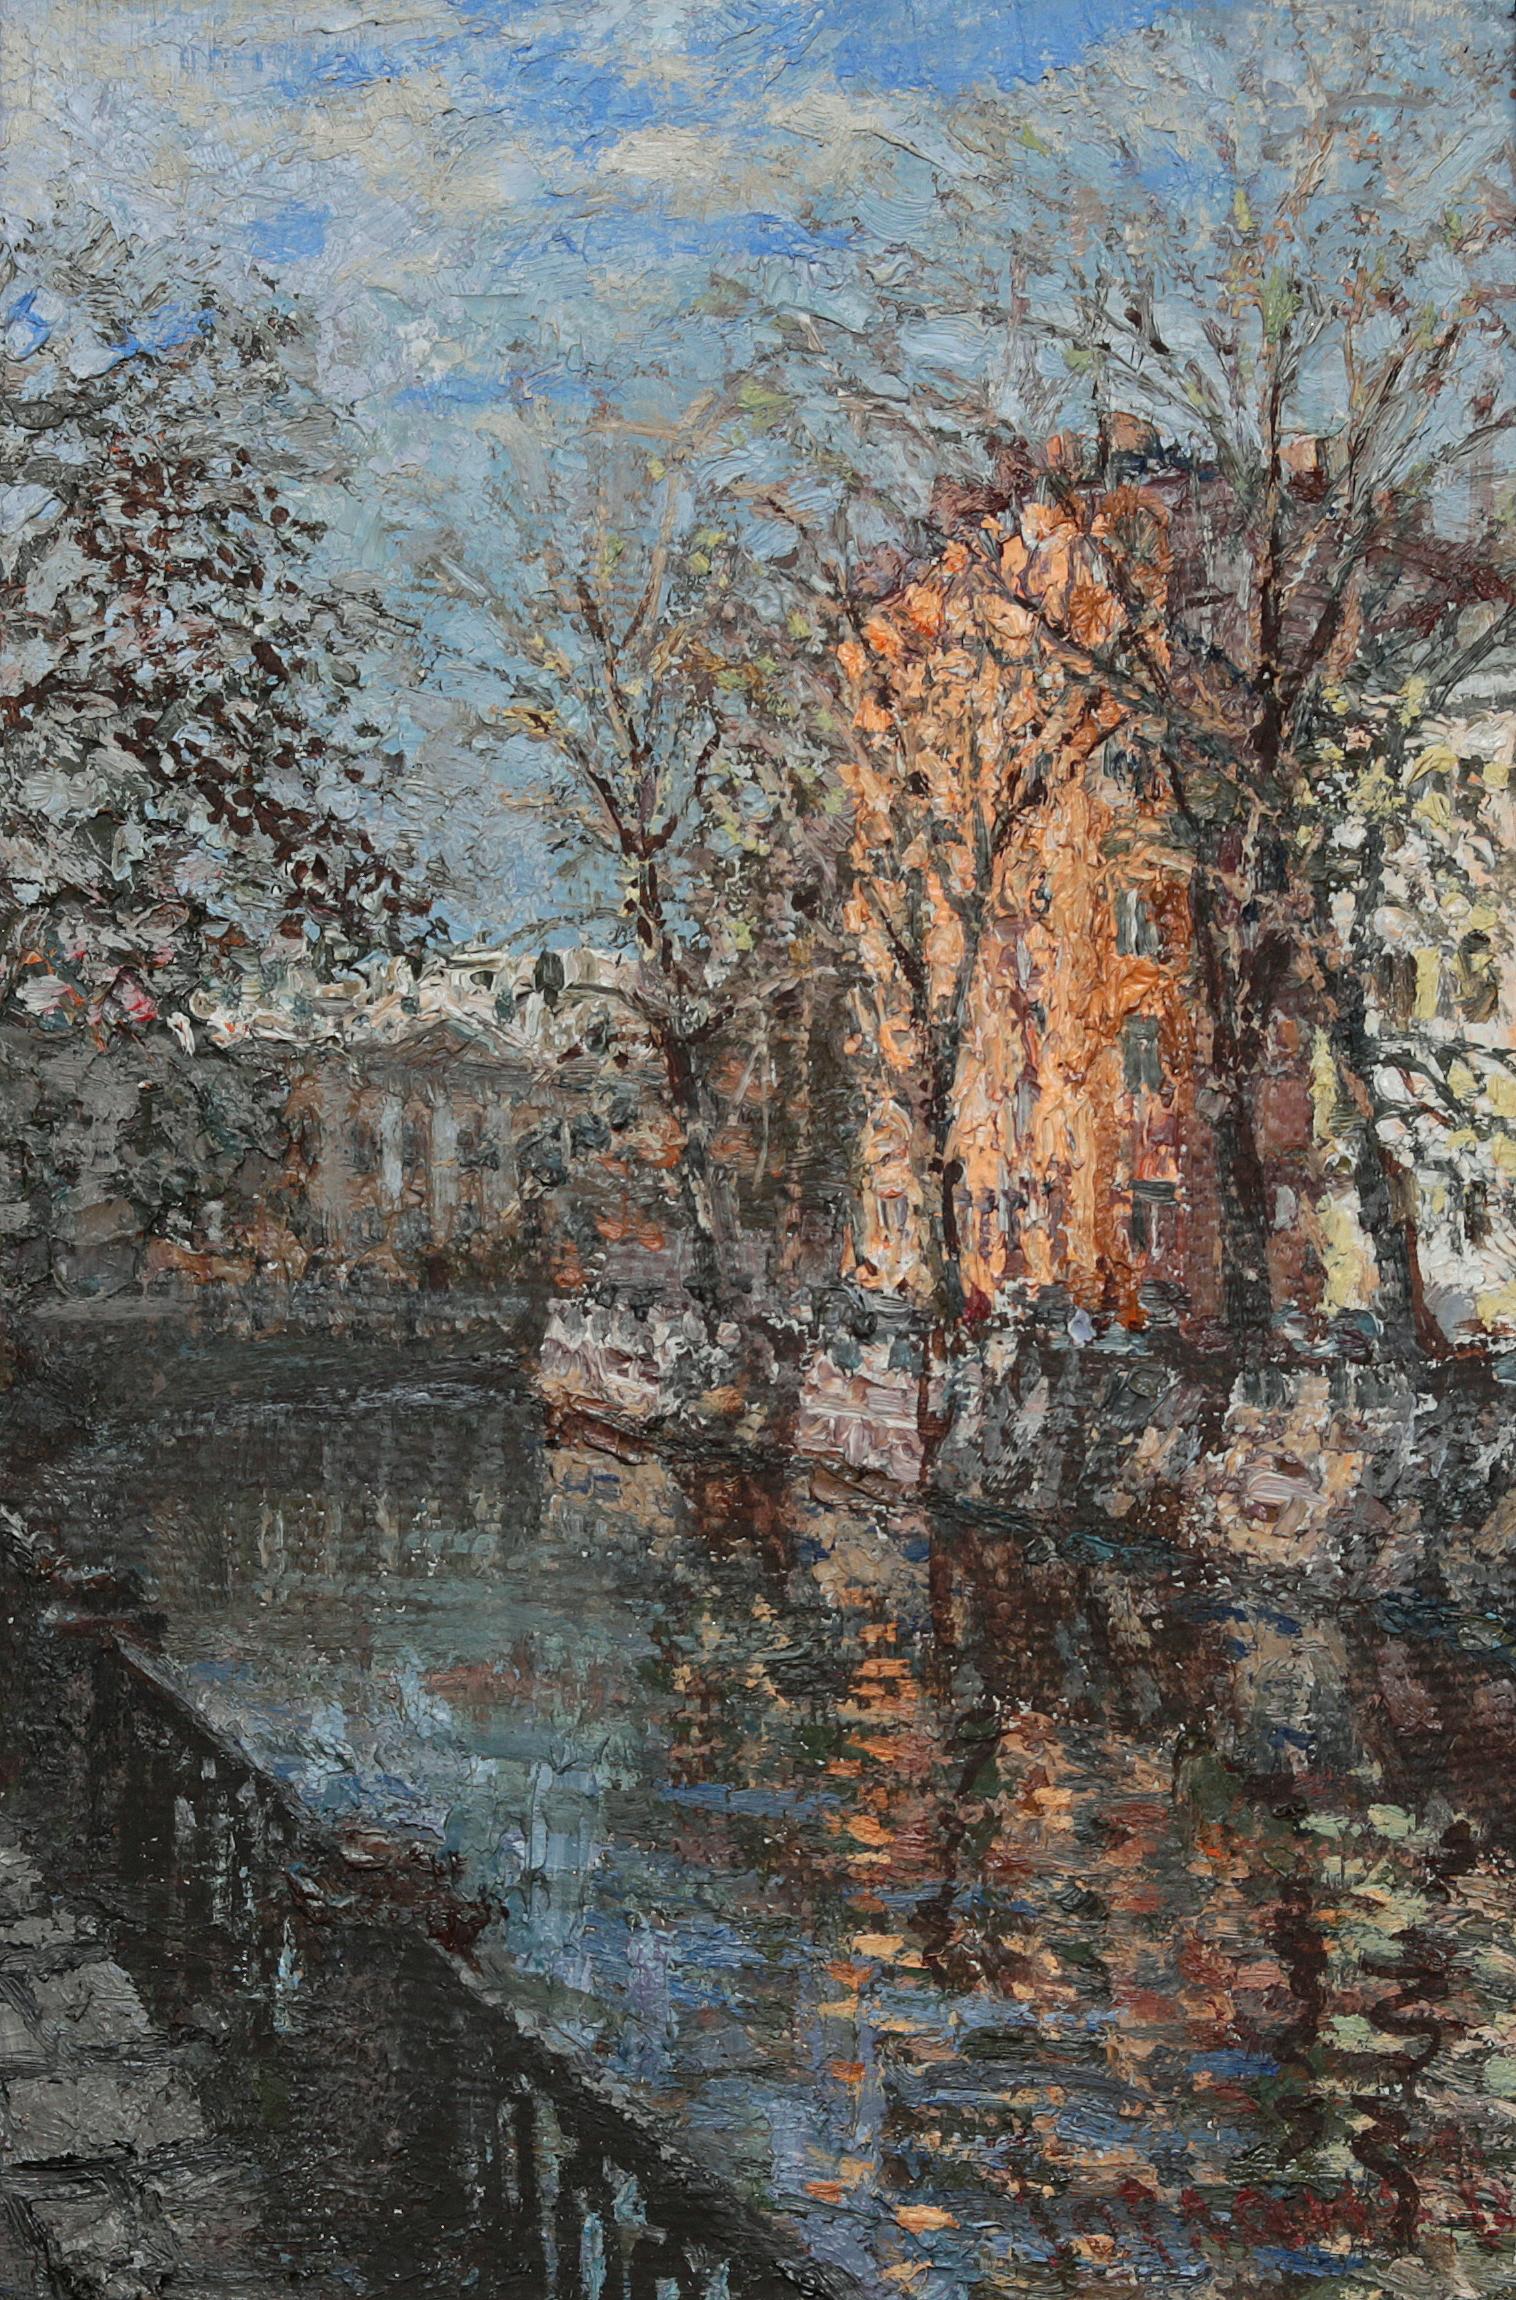 Spring on the canal. Original modern art painting